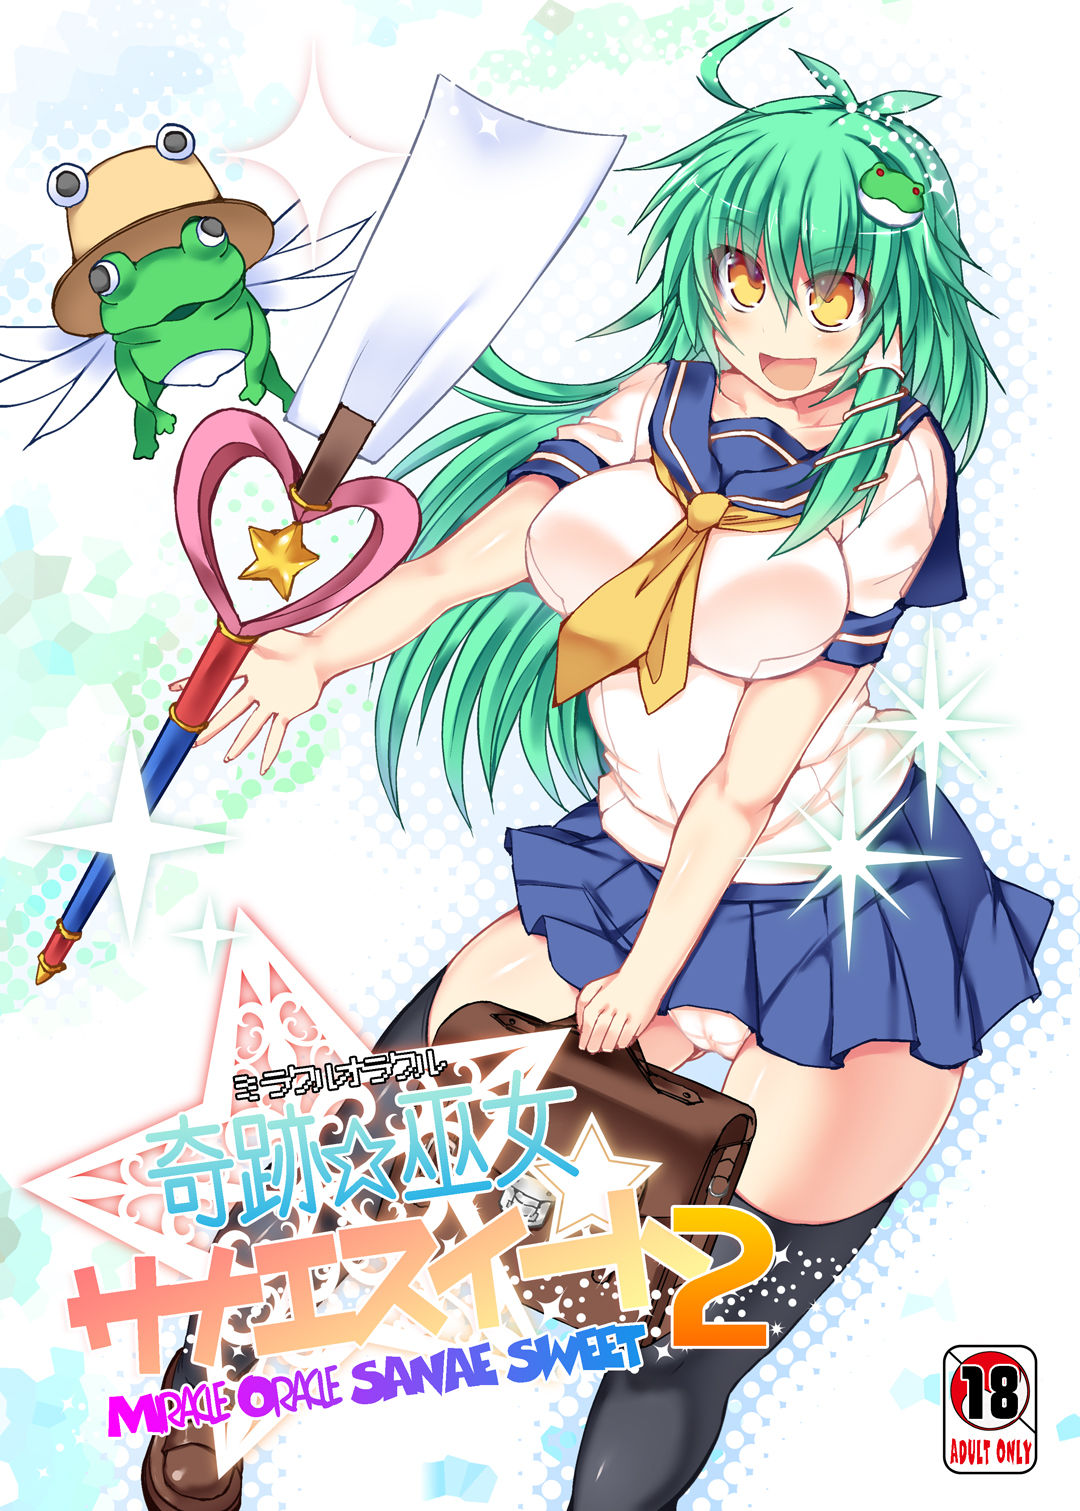 [Stapspats (Hisui)] Miracle☆Oracle Sanae Sweet 2 (Touhou Project) [Digital] [Stapspats (翡翠石)] 奇跡☆巫女サナエスイート2 (東方Project) [DL版]